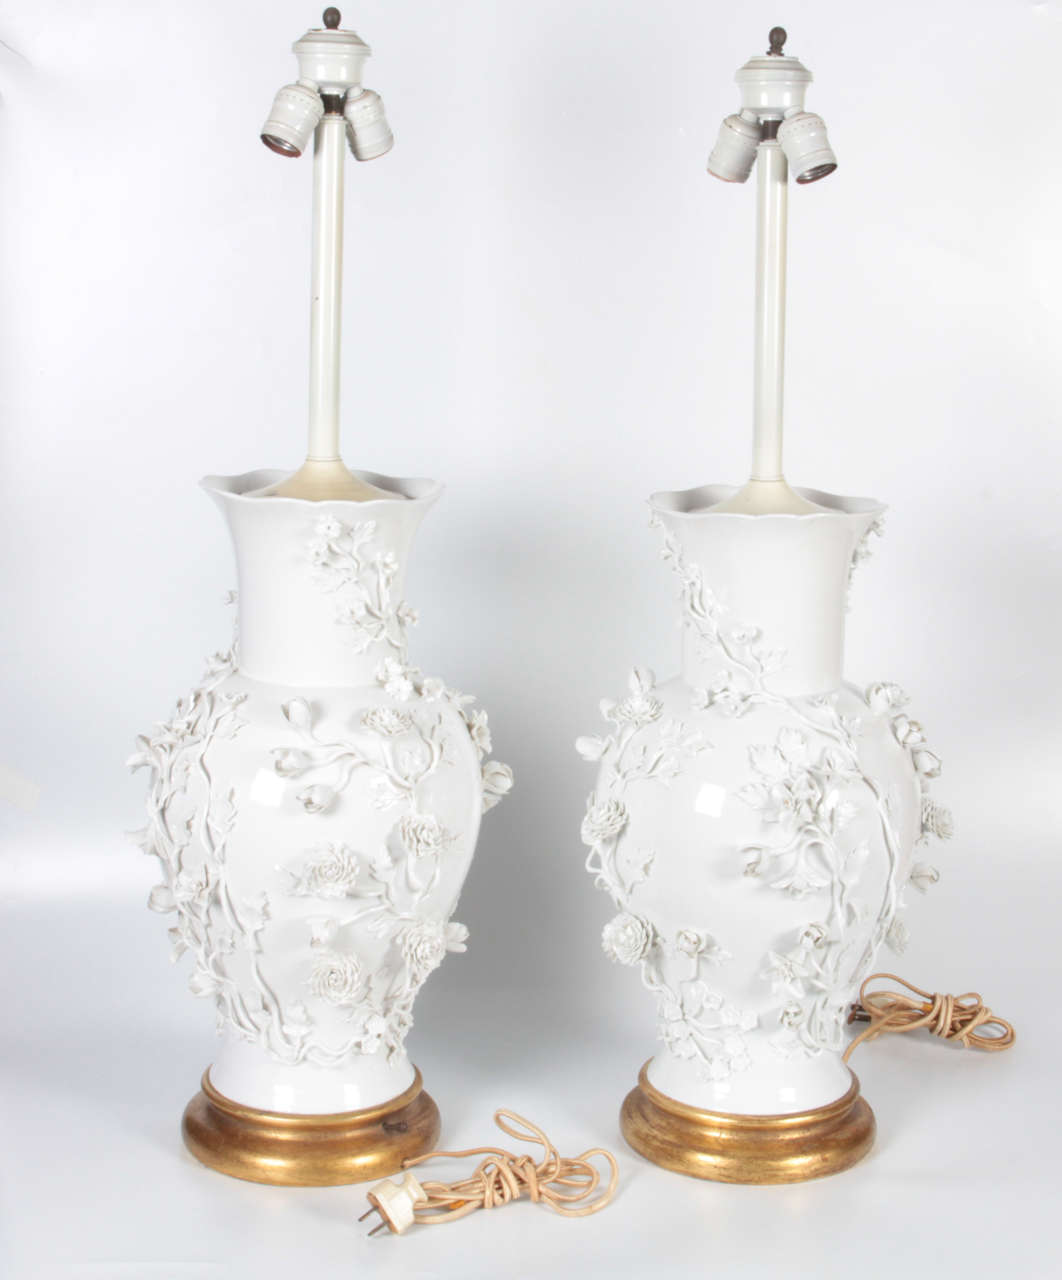 An unusual pair of antique Blanc de Chine porcelain vases mounted as lamps with giltwood bases. Each baluster shaped vase is embellished in relief with porcelain flowers and leaves, mid-1800s.

An excellent addition to a 20th century interior.